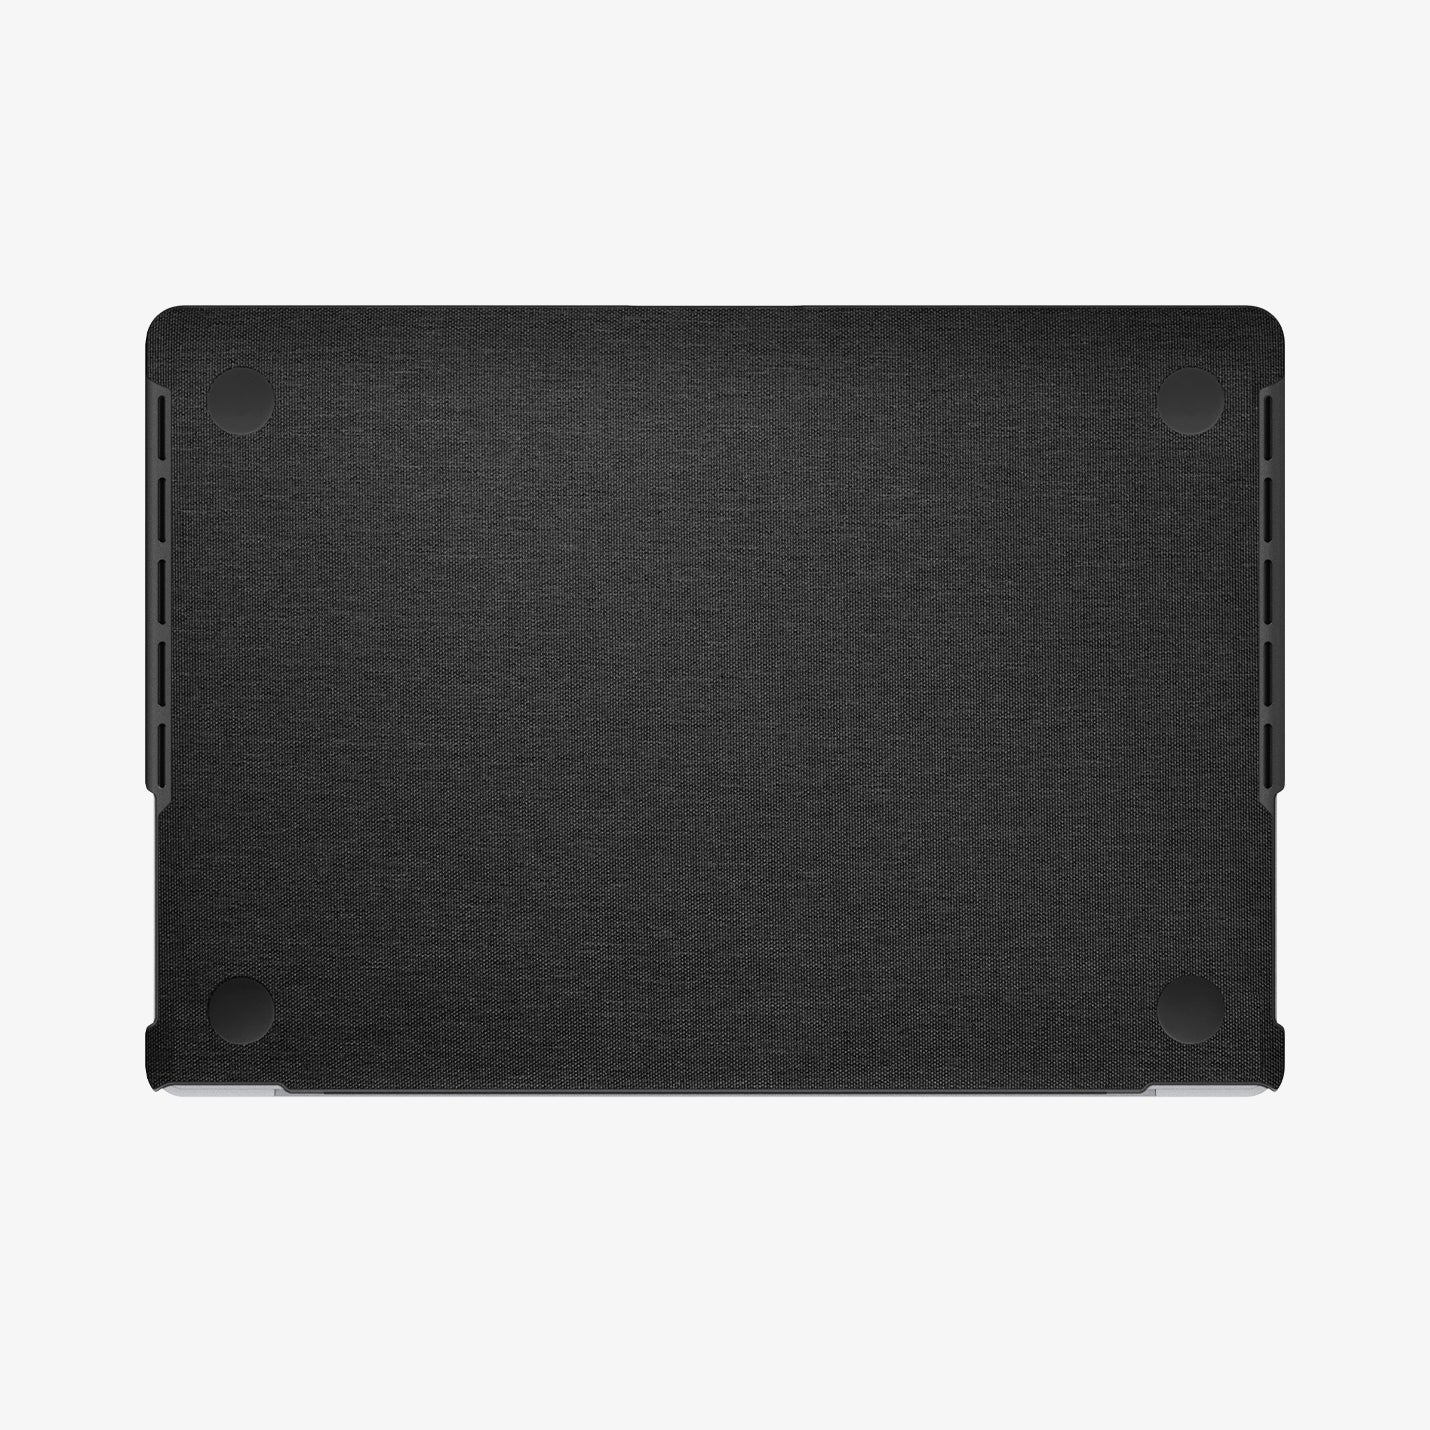 ACS04211 - MacBook Pro 16-inch Case Urban Fit in Black showing the bottom